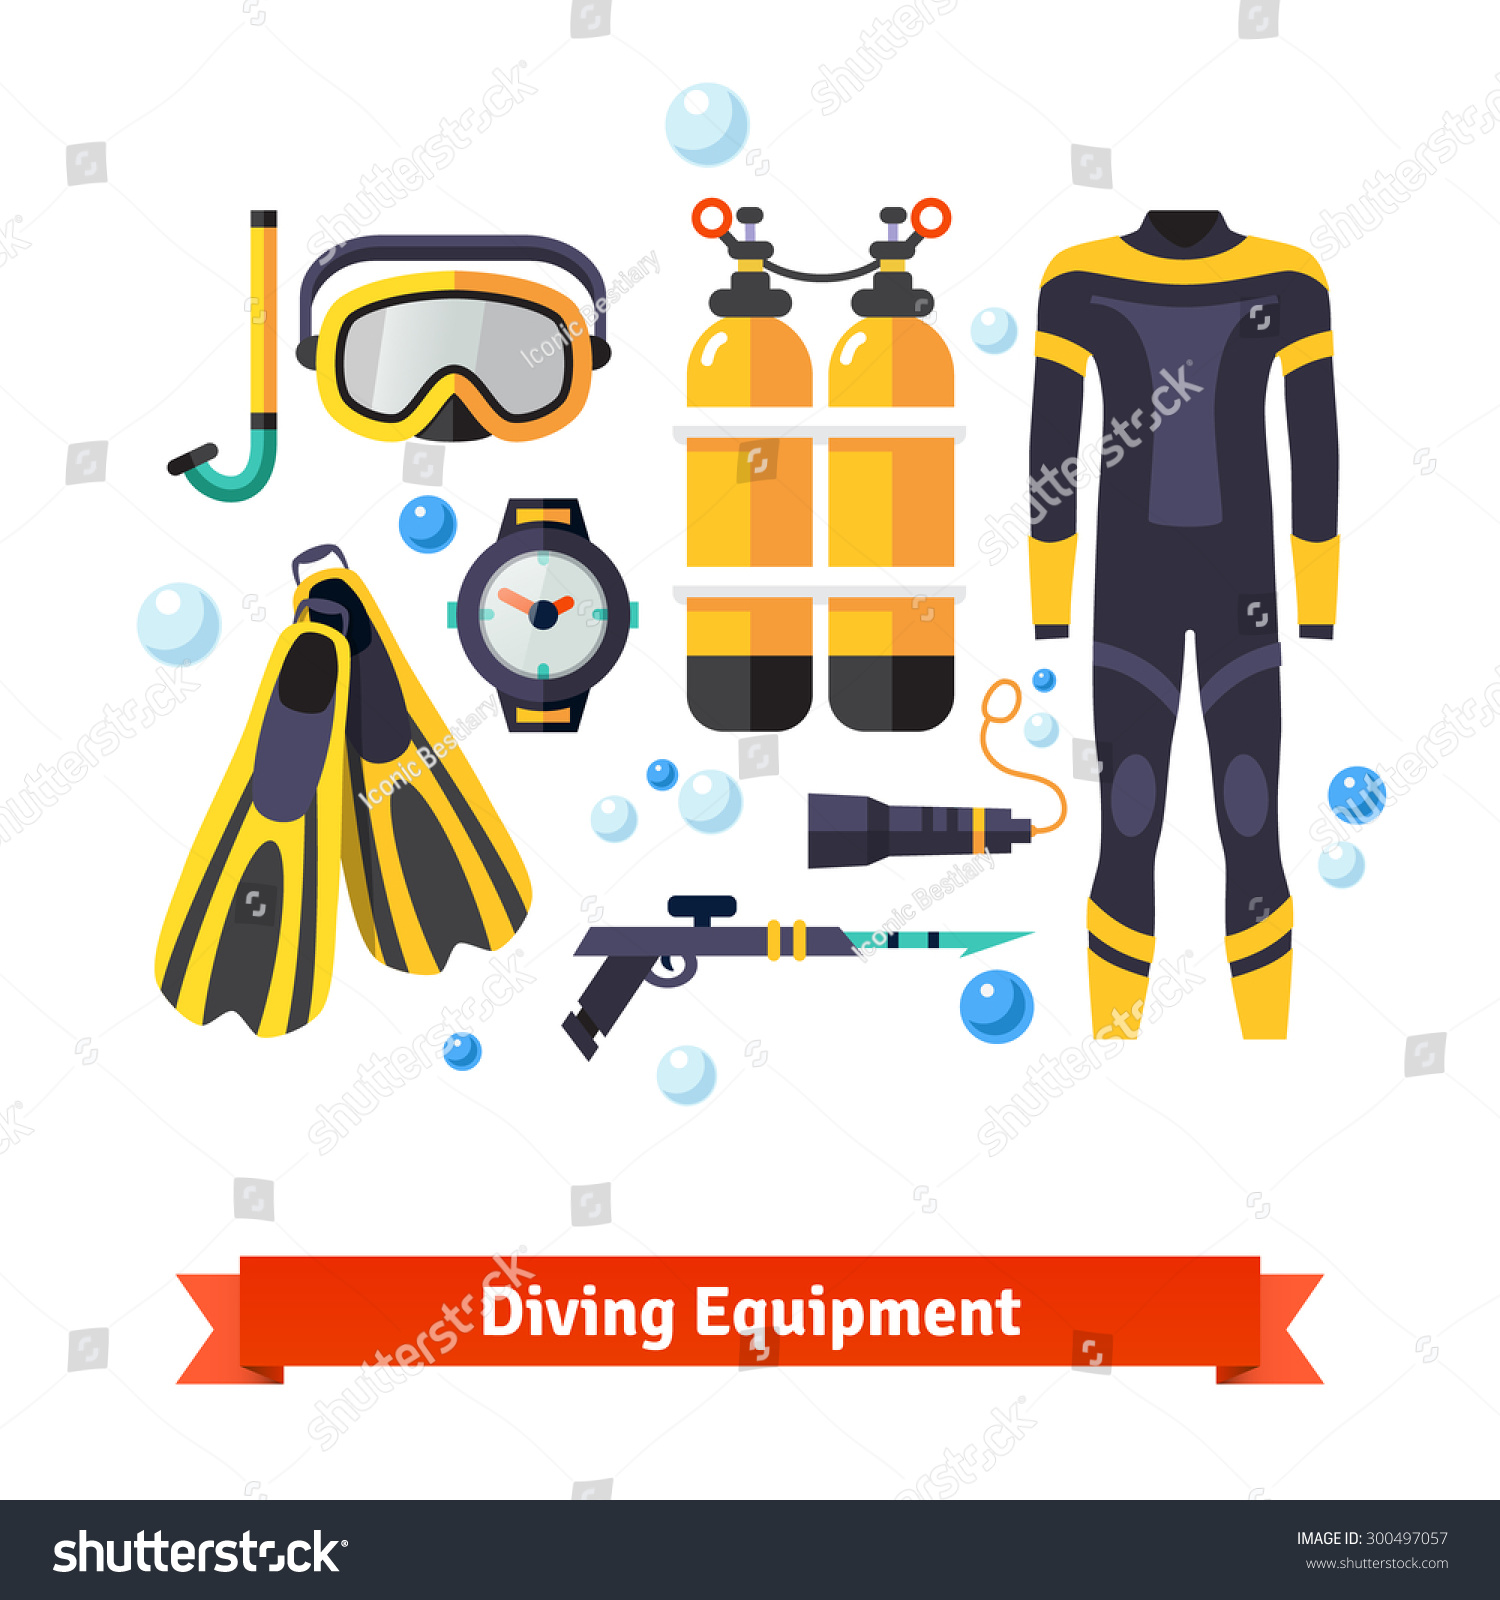 stock-vector-diving-equipment-icons-set-mask-and-snorkel-oxygen-tanks-wetsuit-flashlight-fins-and-harpoon-300497057.jpg